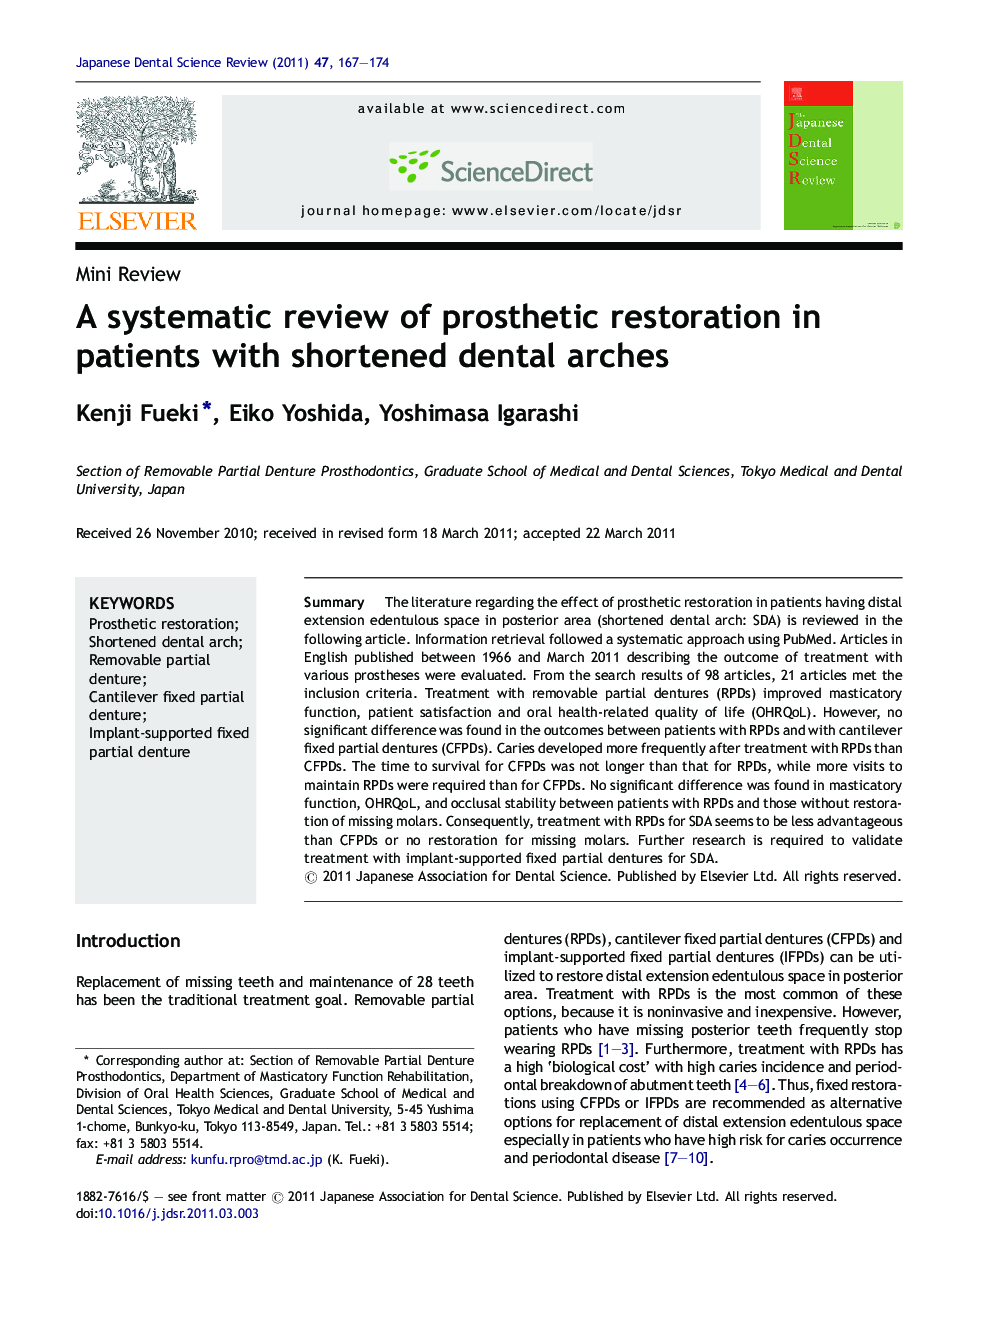 A systematic review of prosthetic restoration in patients with shortened dental arches